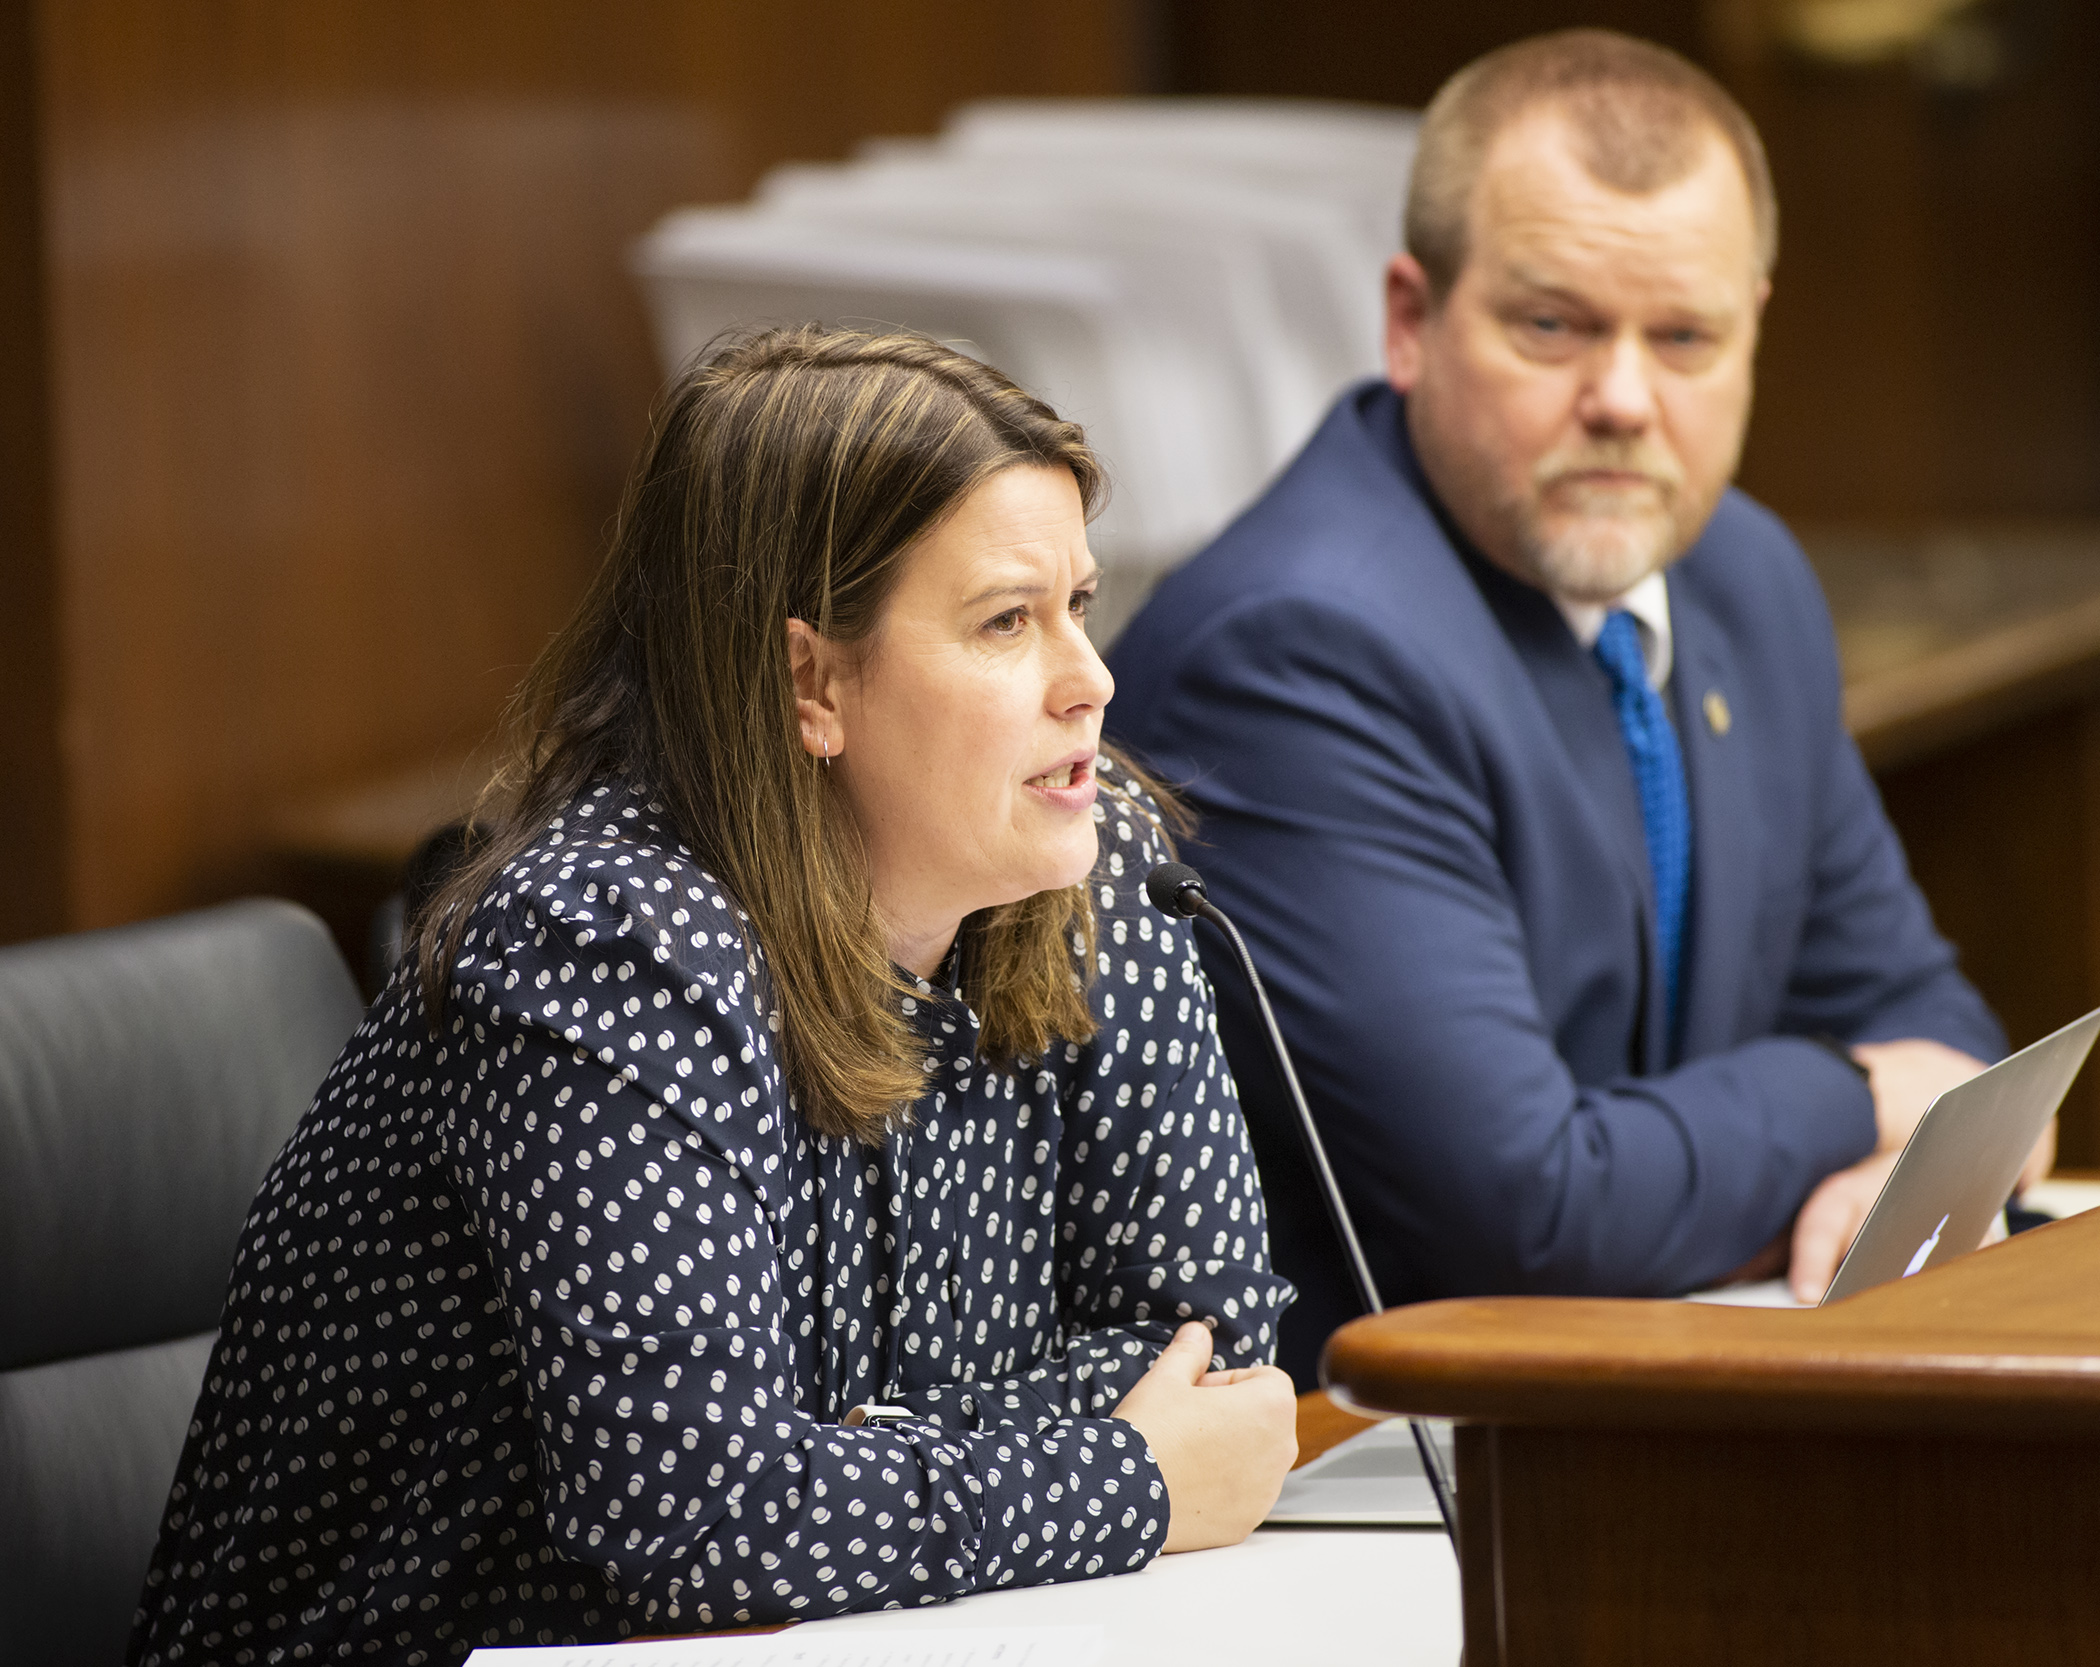 Jessica Webster, Legal Aid staff attorney, testifies before the House Education Policy Committee on HF55, sponsored by Rep. Tony Jurgens, right, which would, in part, work to prohibit the practice of so-called “lunch shaming.” Photo by Paul Battaglia